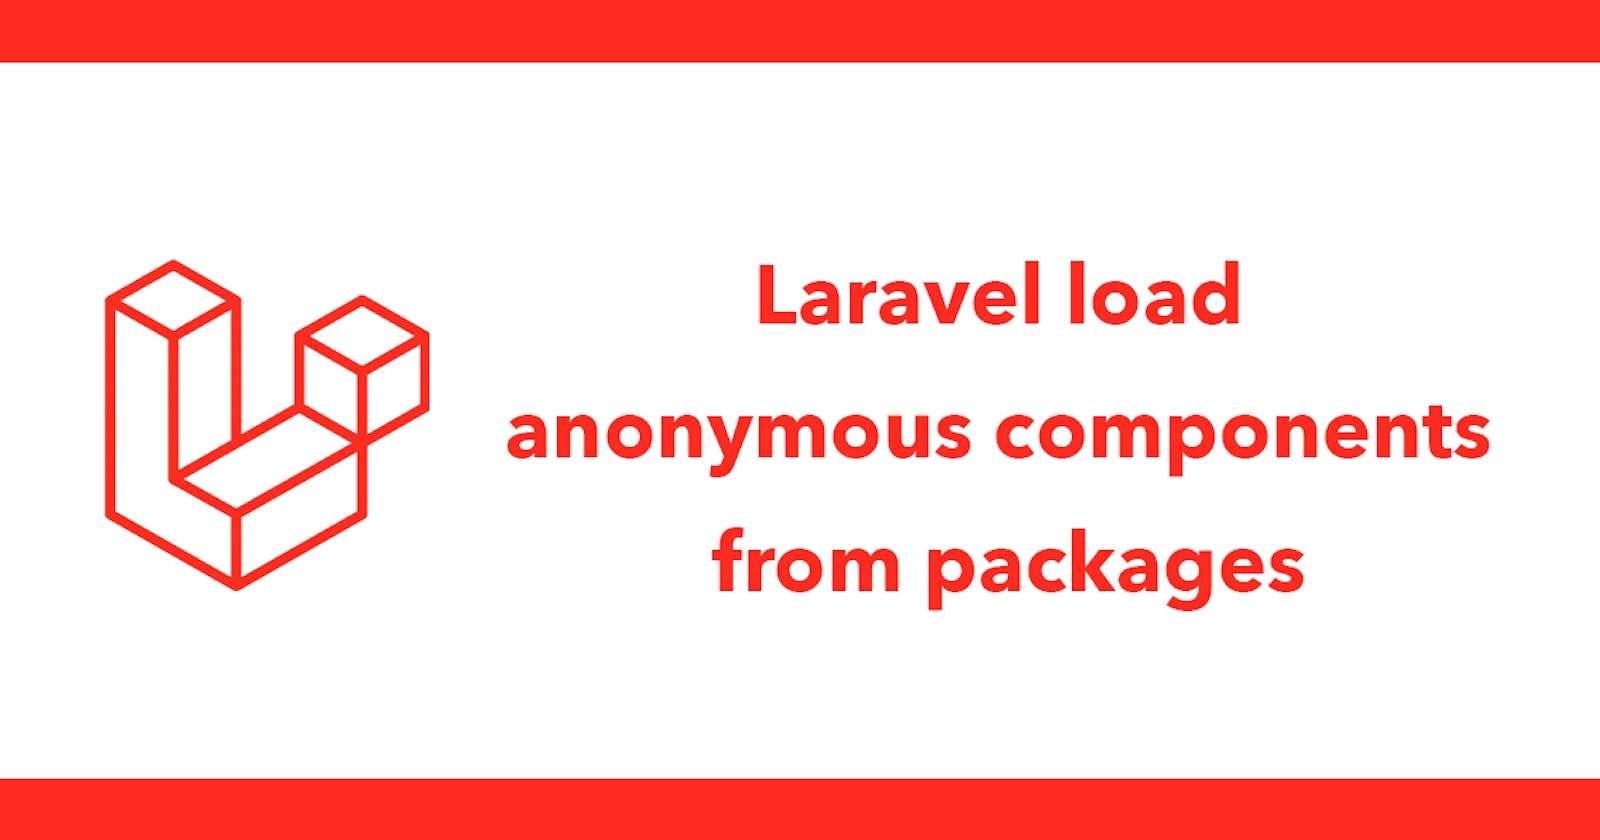 Laravel load anonymous components from packages